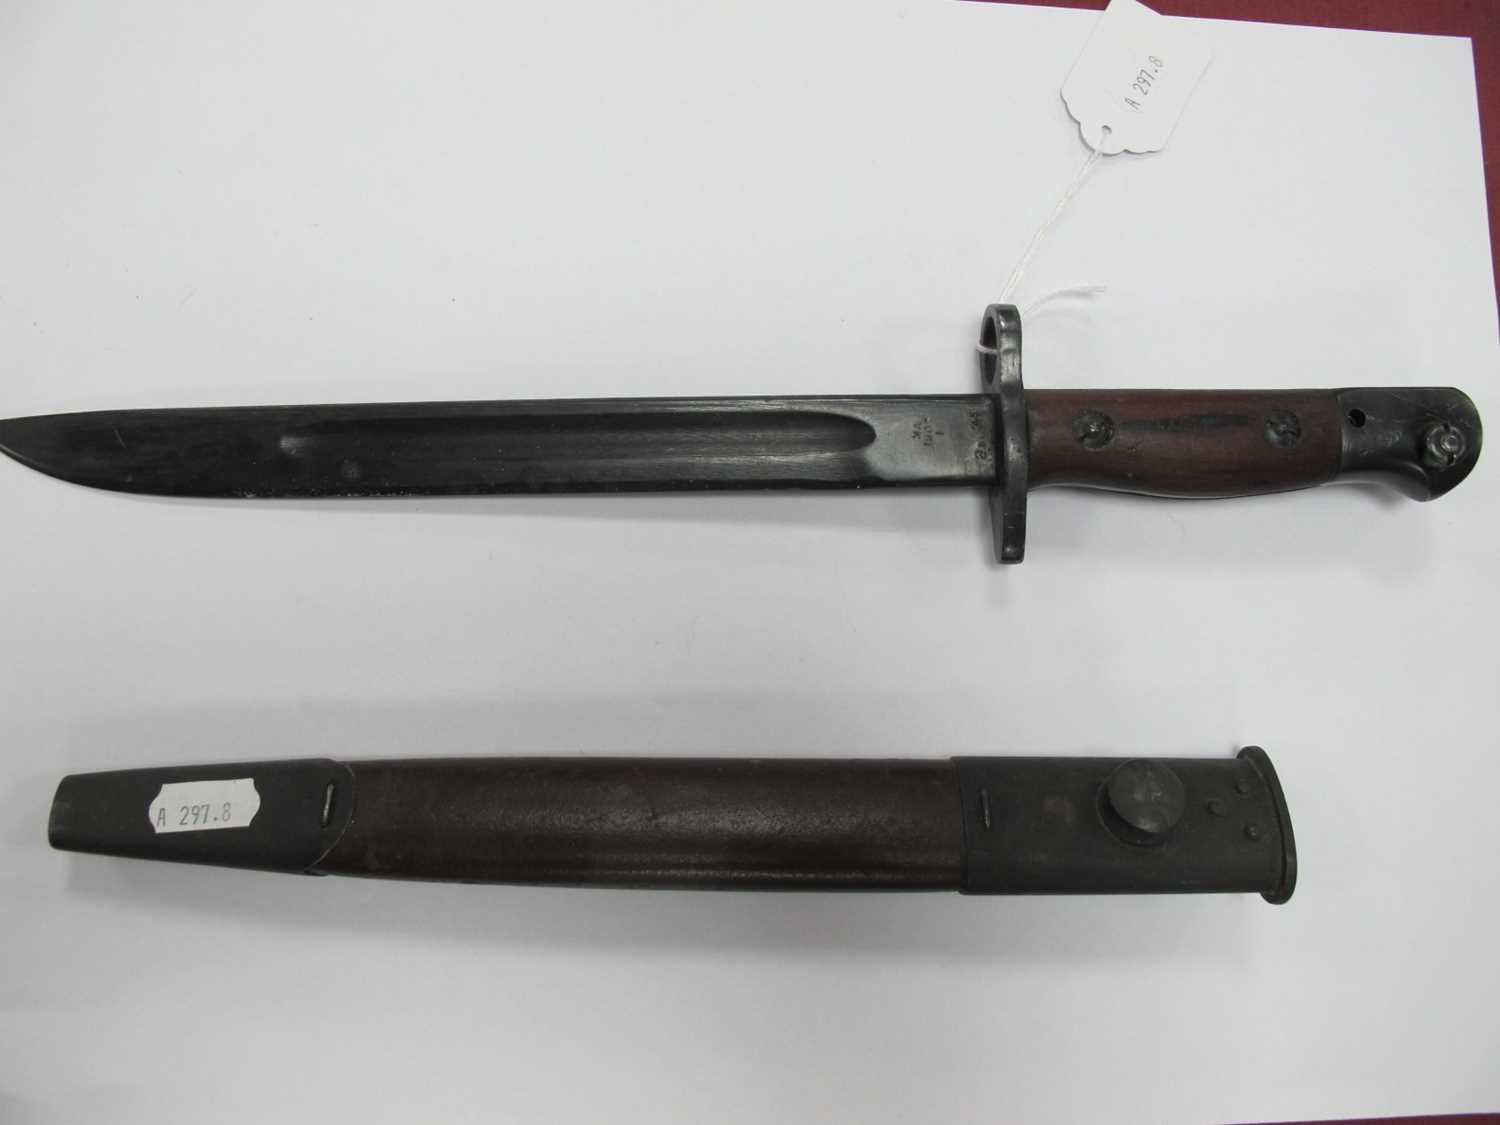 WWII Australian 1907 Pattern Short Bayonet, with various marks on blade including year '45', - Image 9 of 12